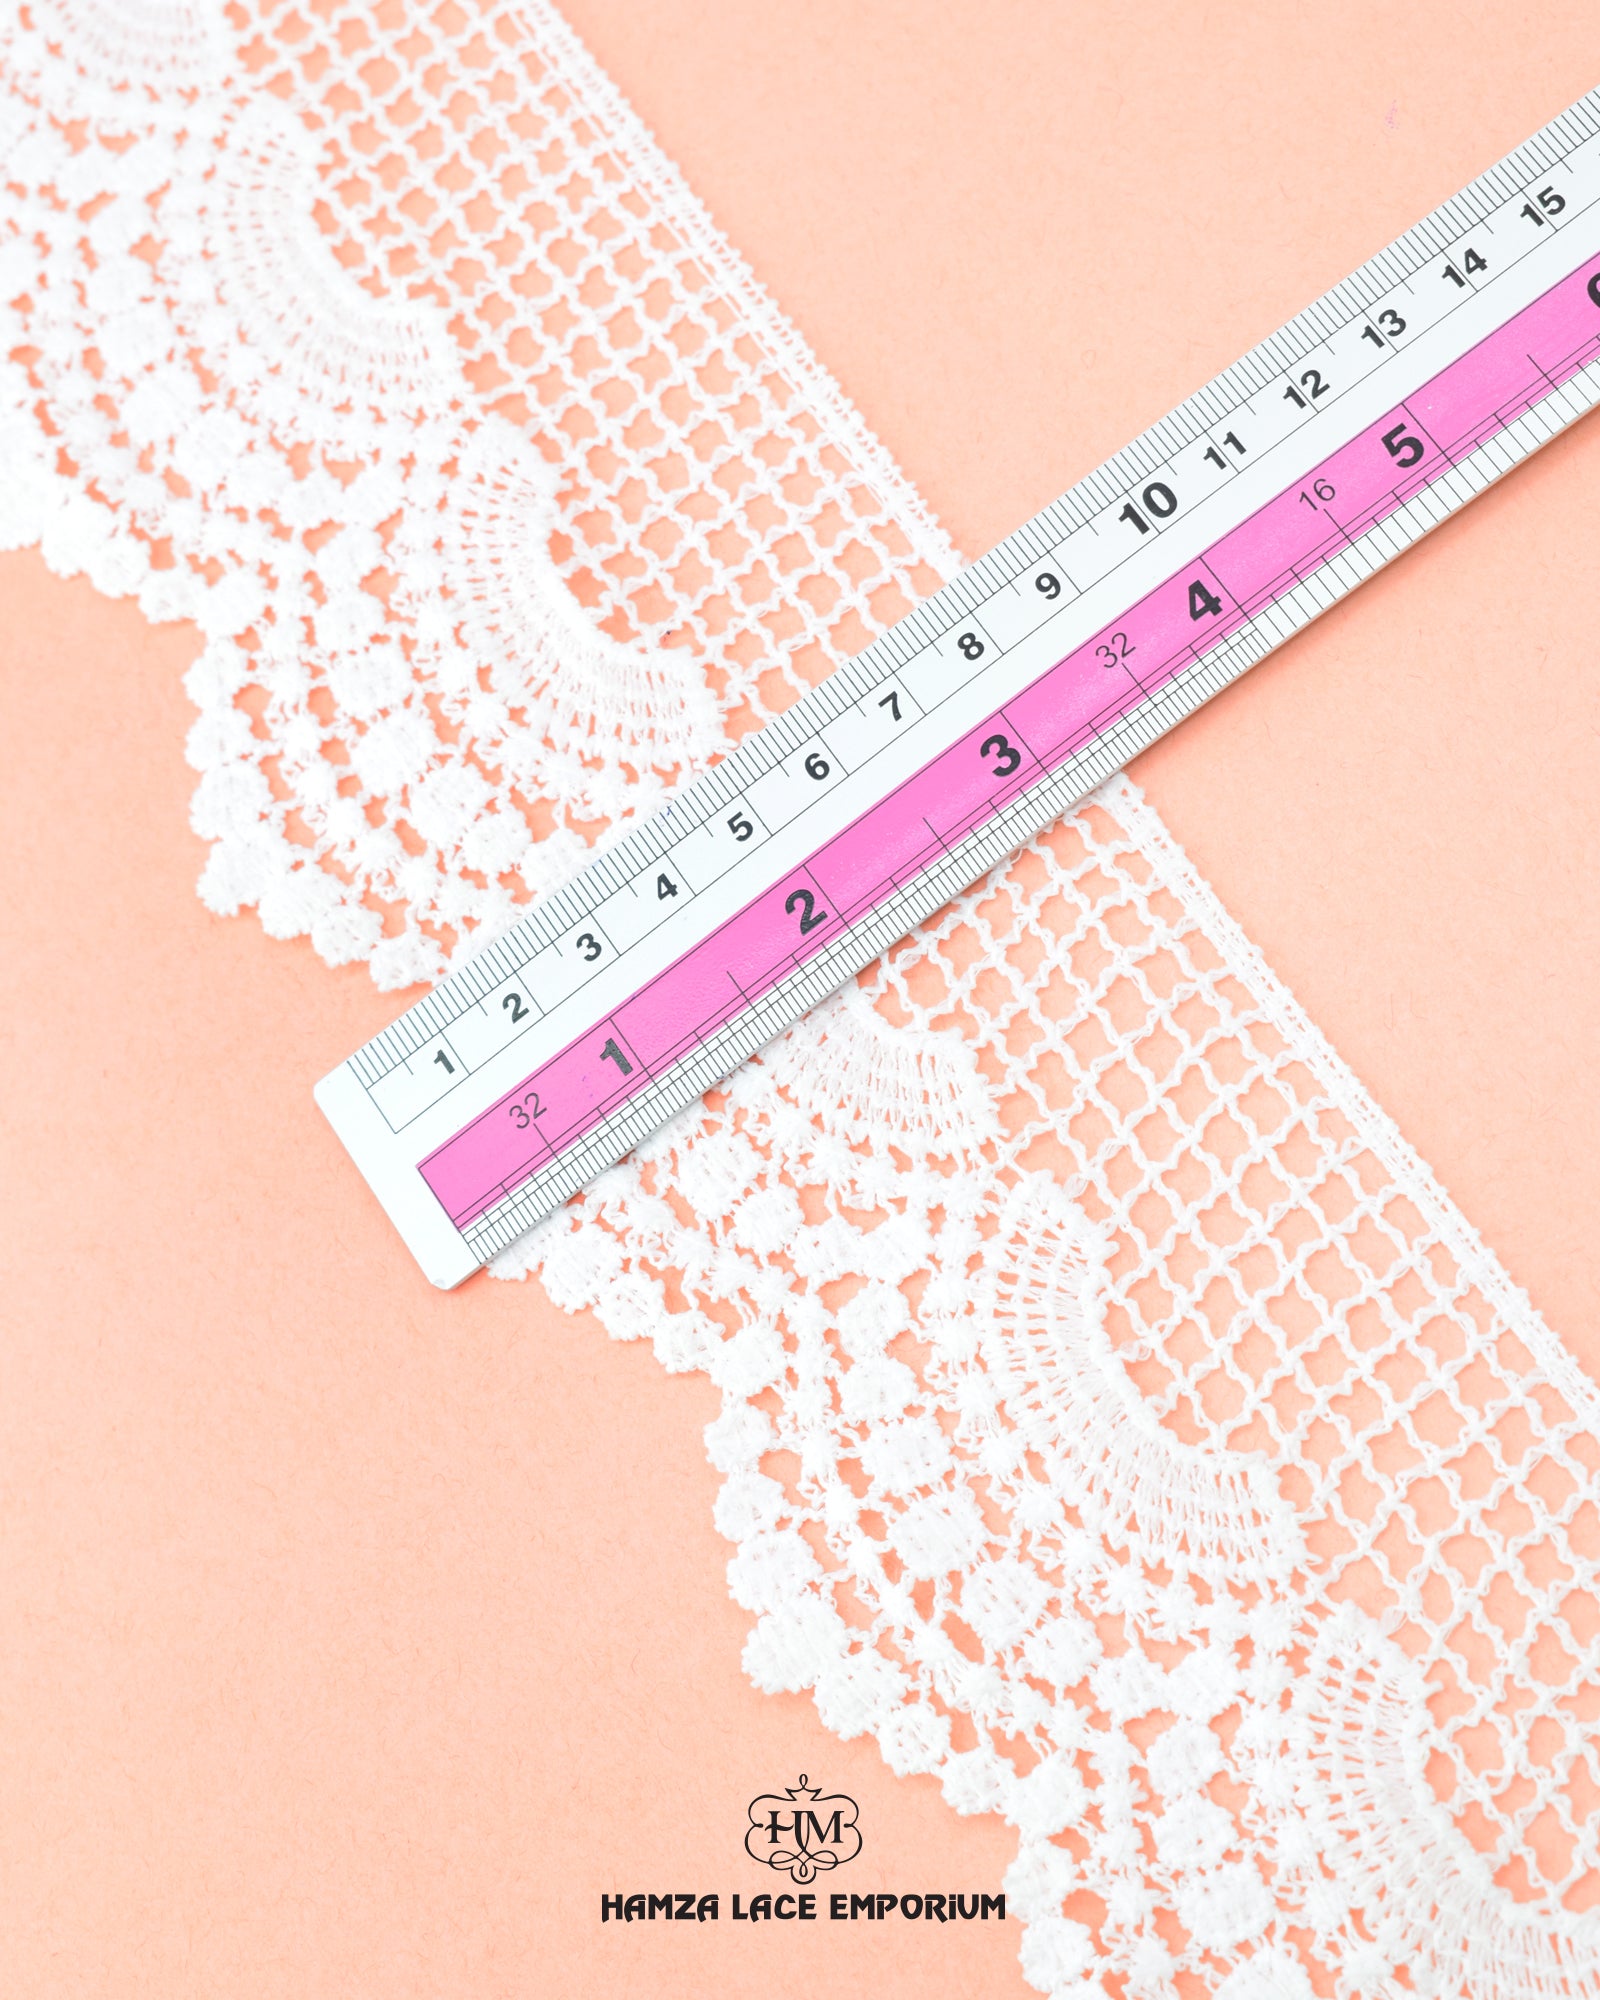 Using a scale, the size of 'Edging Scallop Lace 23609' is shown